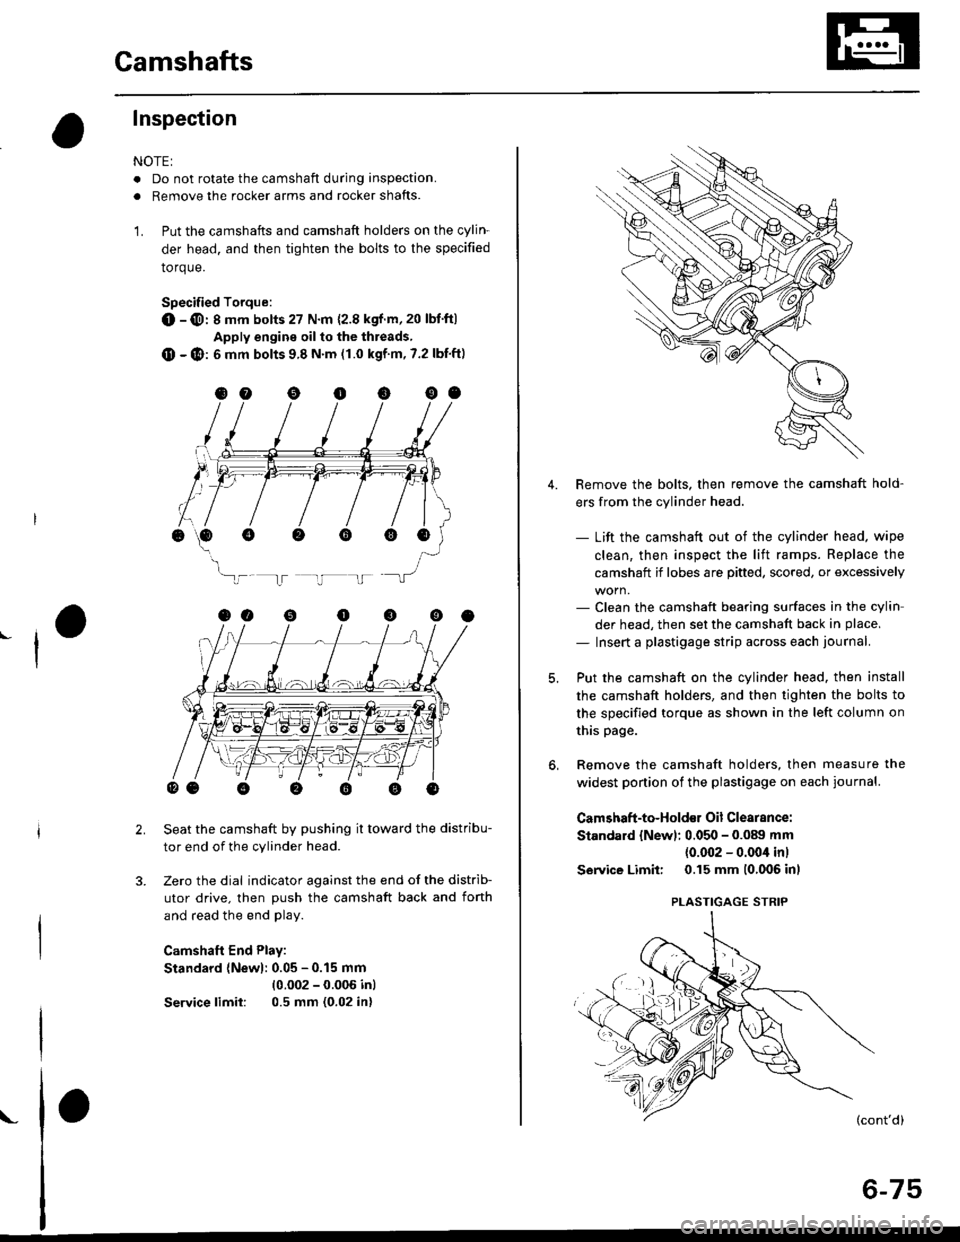 HONDA CIVIC 2000 6.G Workshop Manual Camshafts
Inspection
NOTE:
. Do not rotate the camshaft during inspection.
. Removg the rocker arms and rocker shafts.
L Put the camshafts and camshaft holders on the cylin-
der head. and then tighte